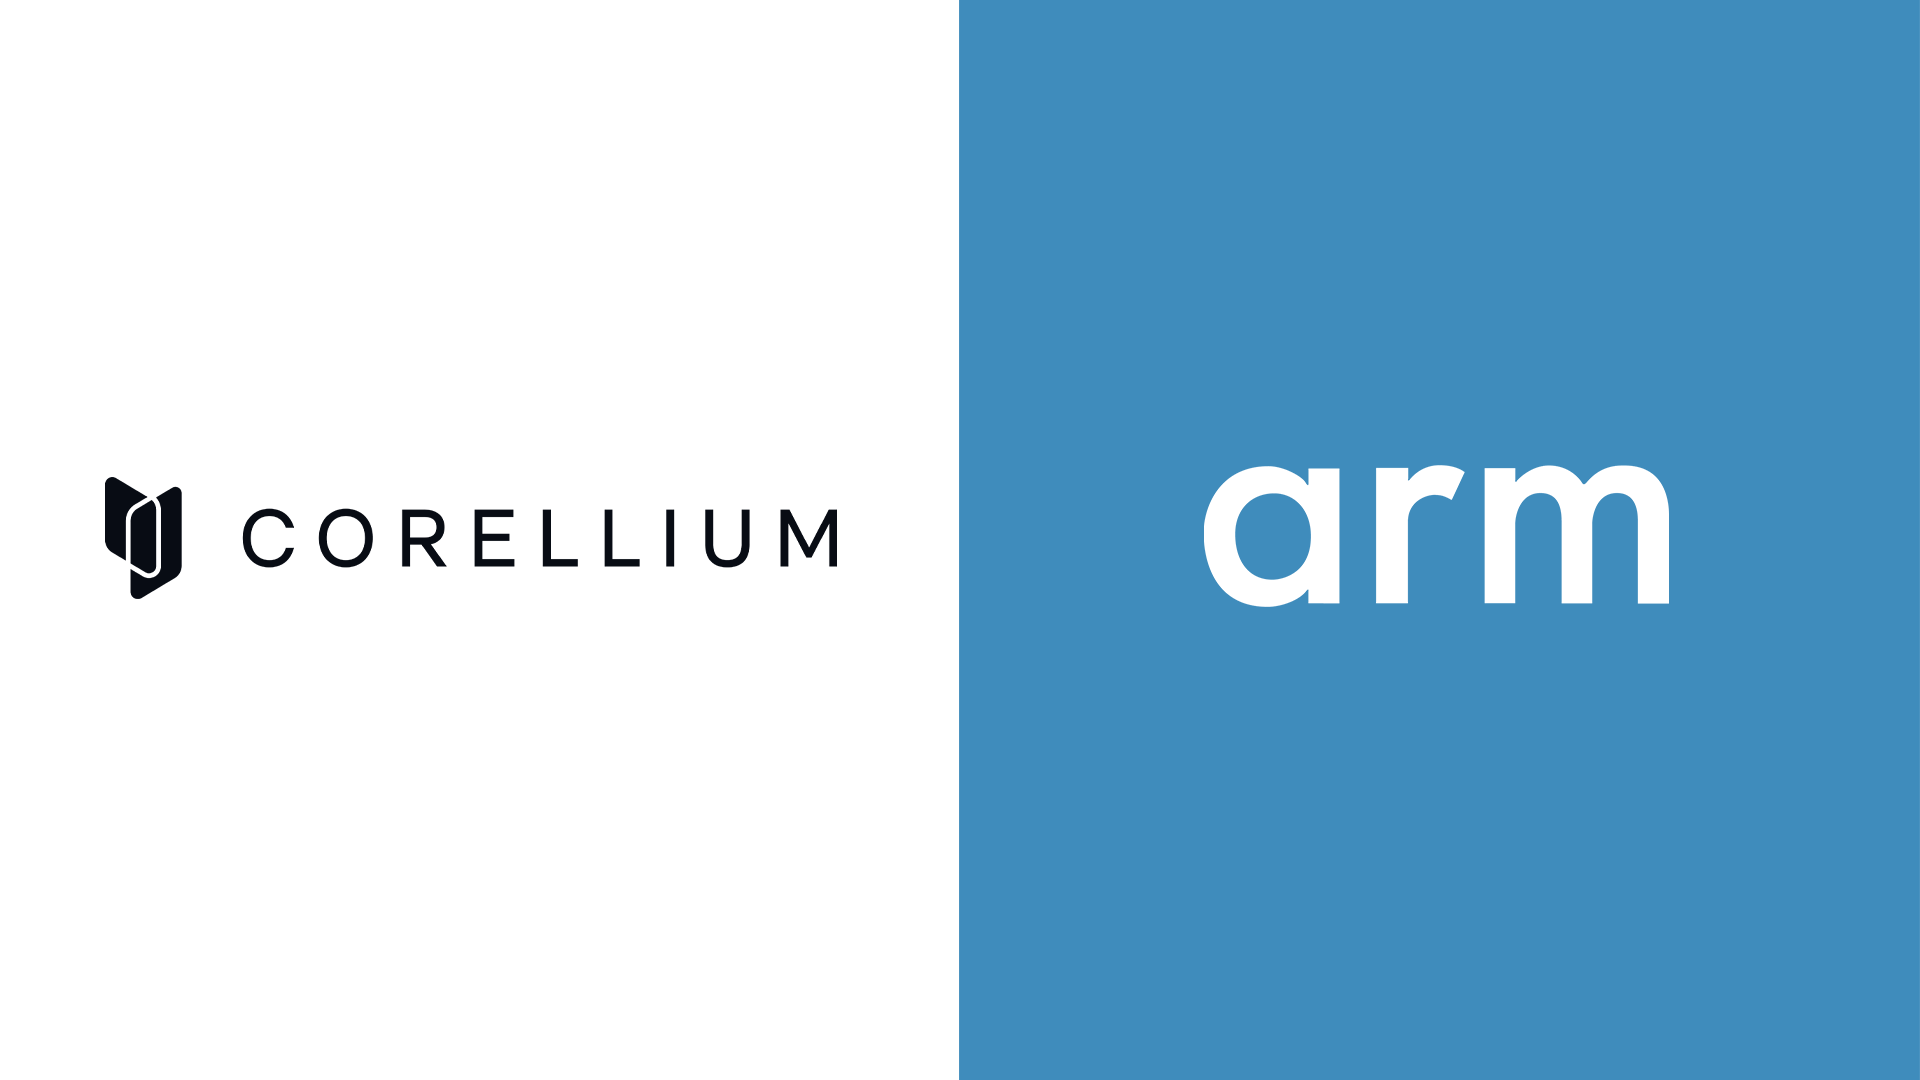 Corellium partners with Arm to accelerate IoT development and testing